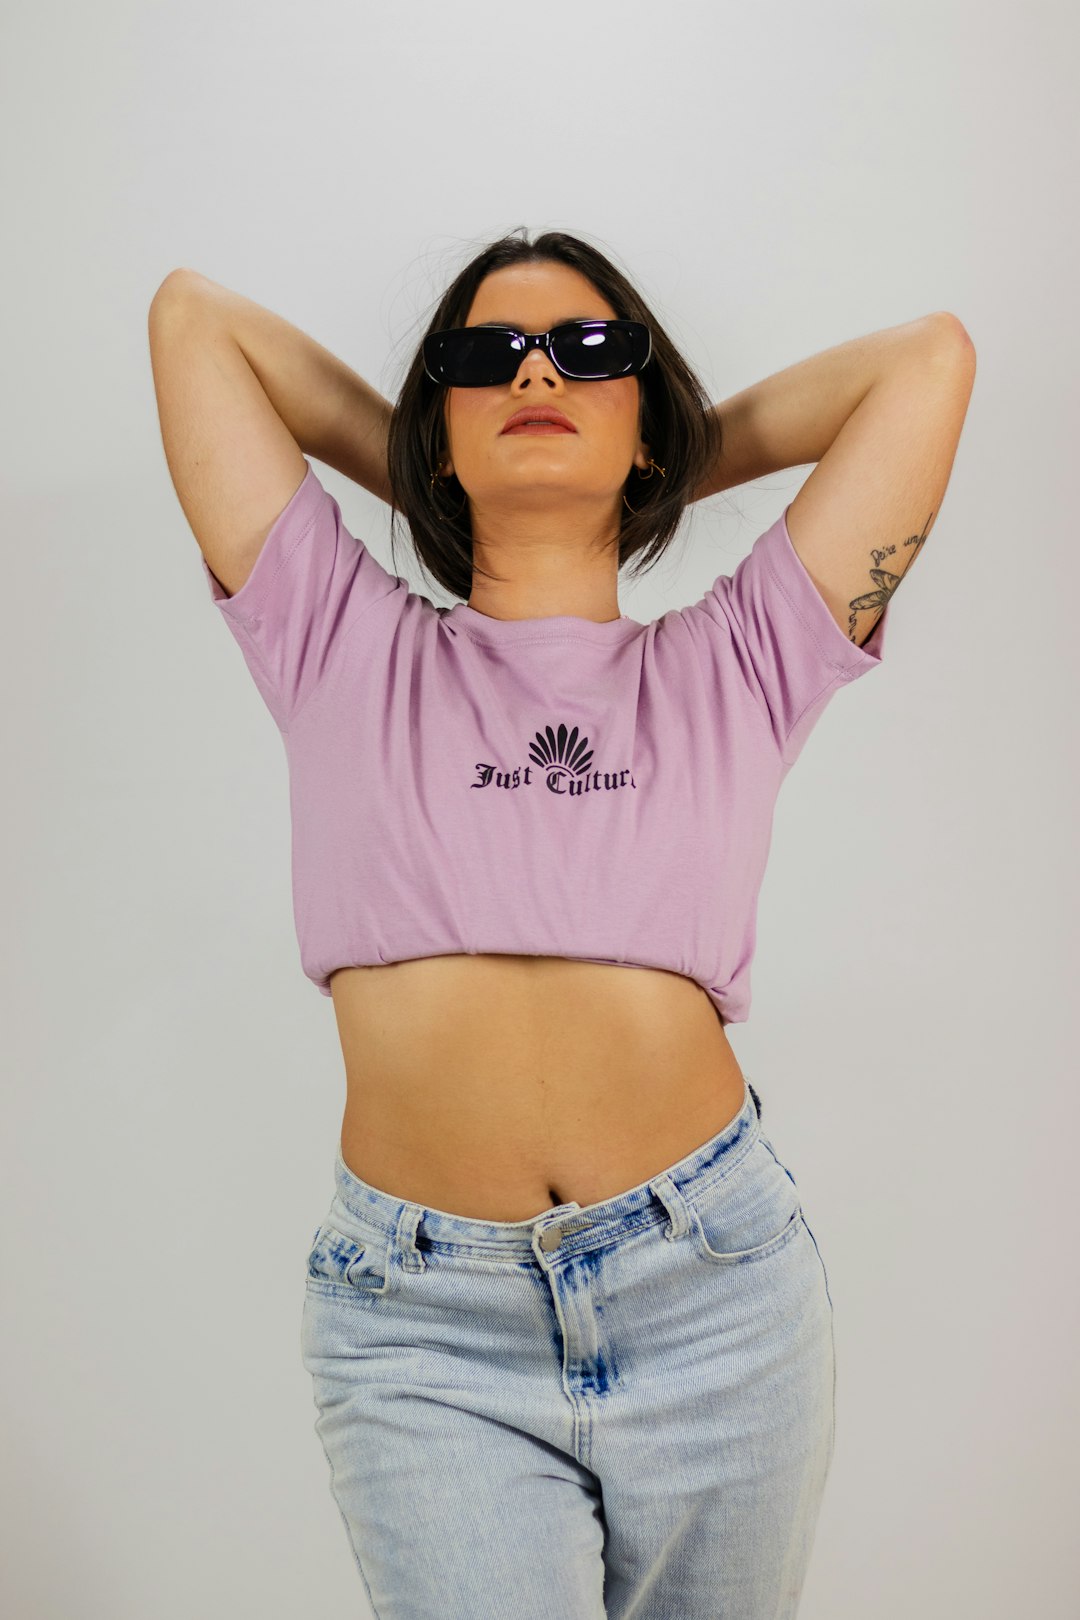 woman in pink crew neck t-shirt and blue denim shorts